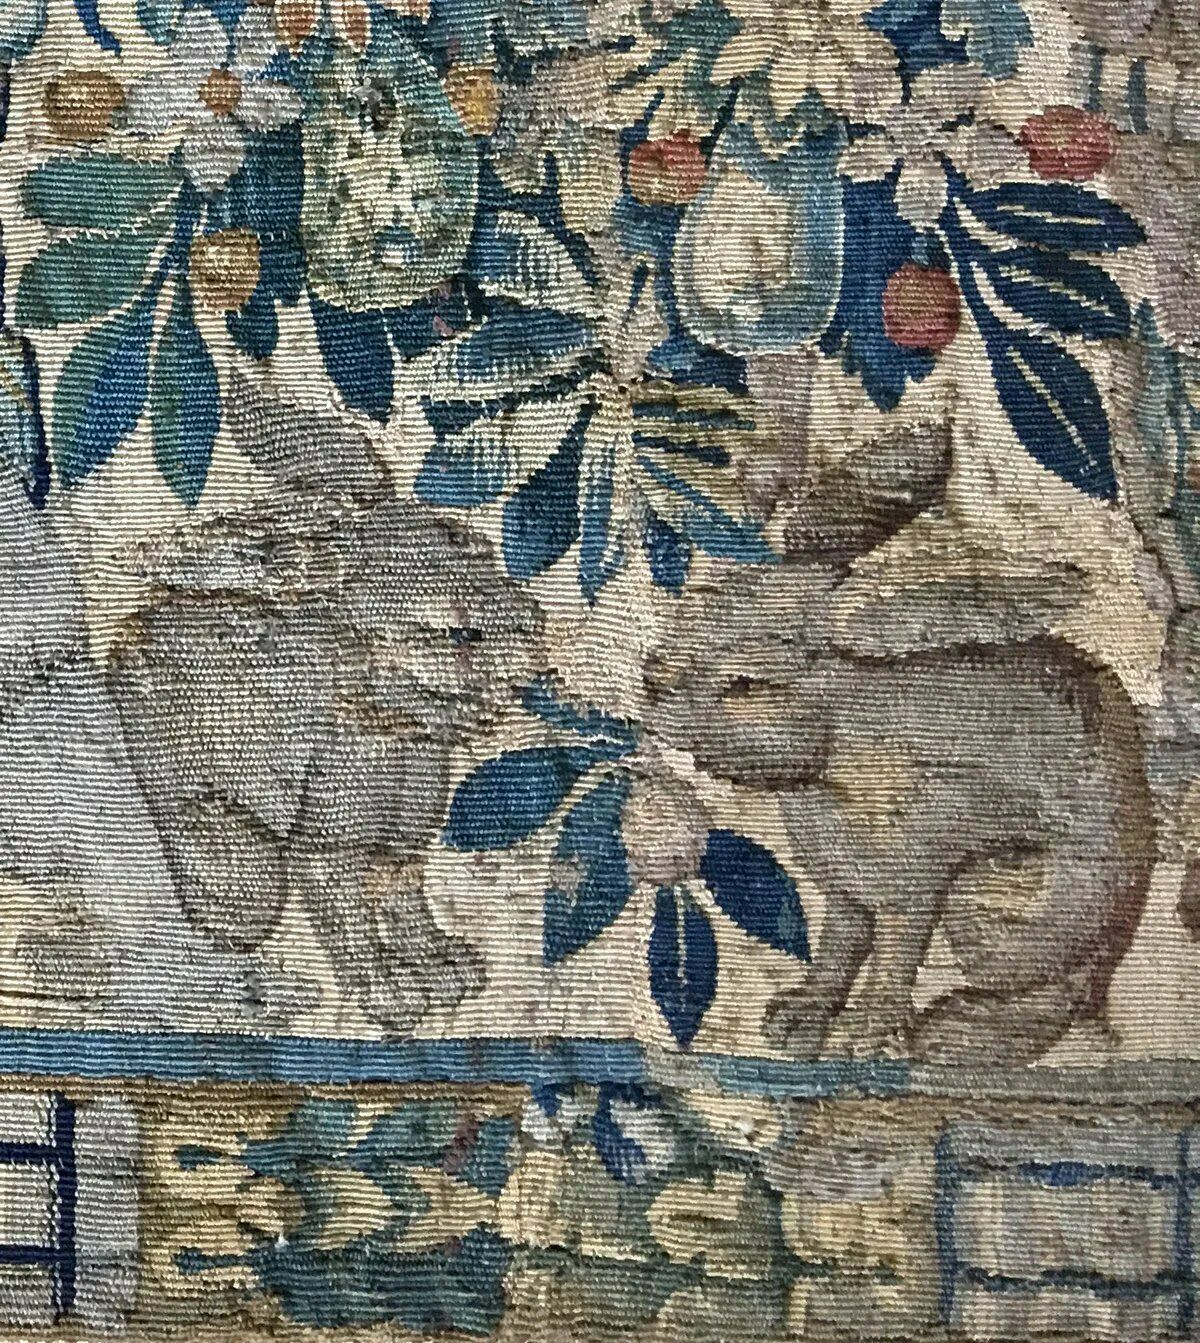 RARE c.1600s Woven Flemish Tapestry 70" Long, 19" Wide, Figures, Putti, Rabbits